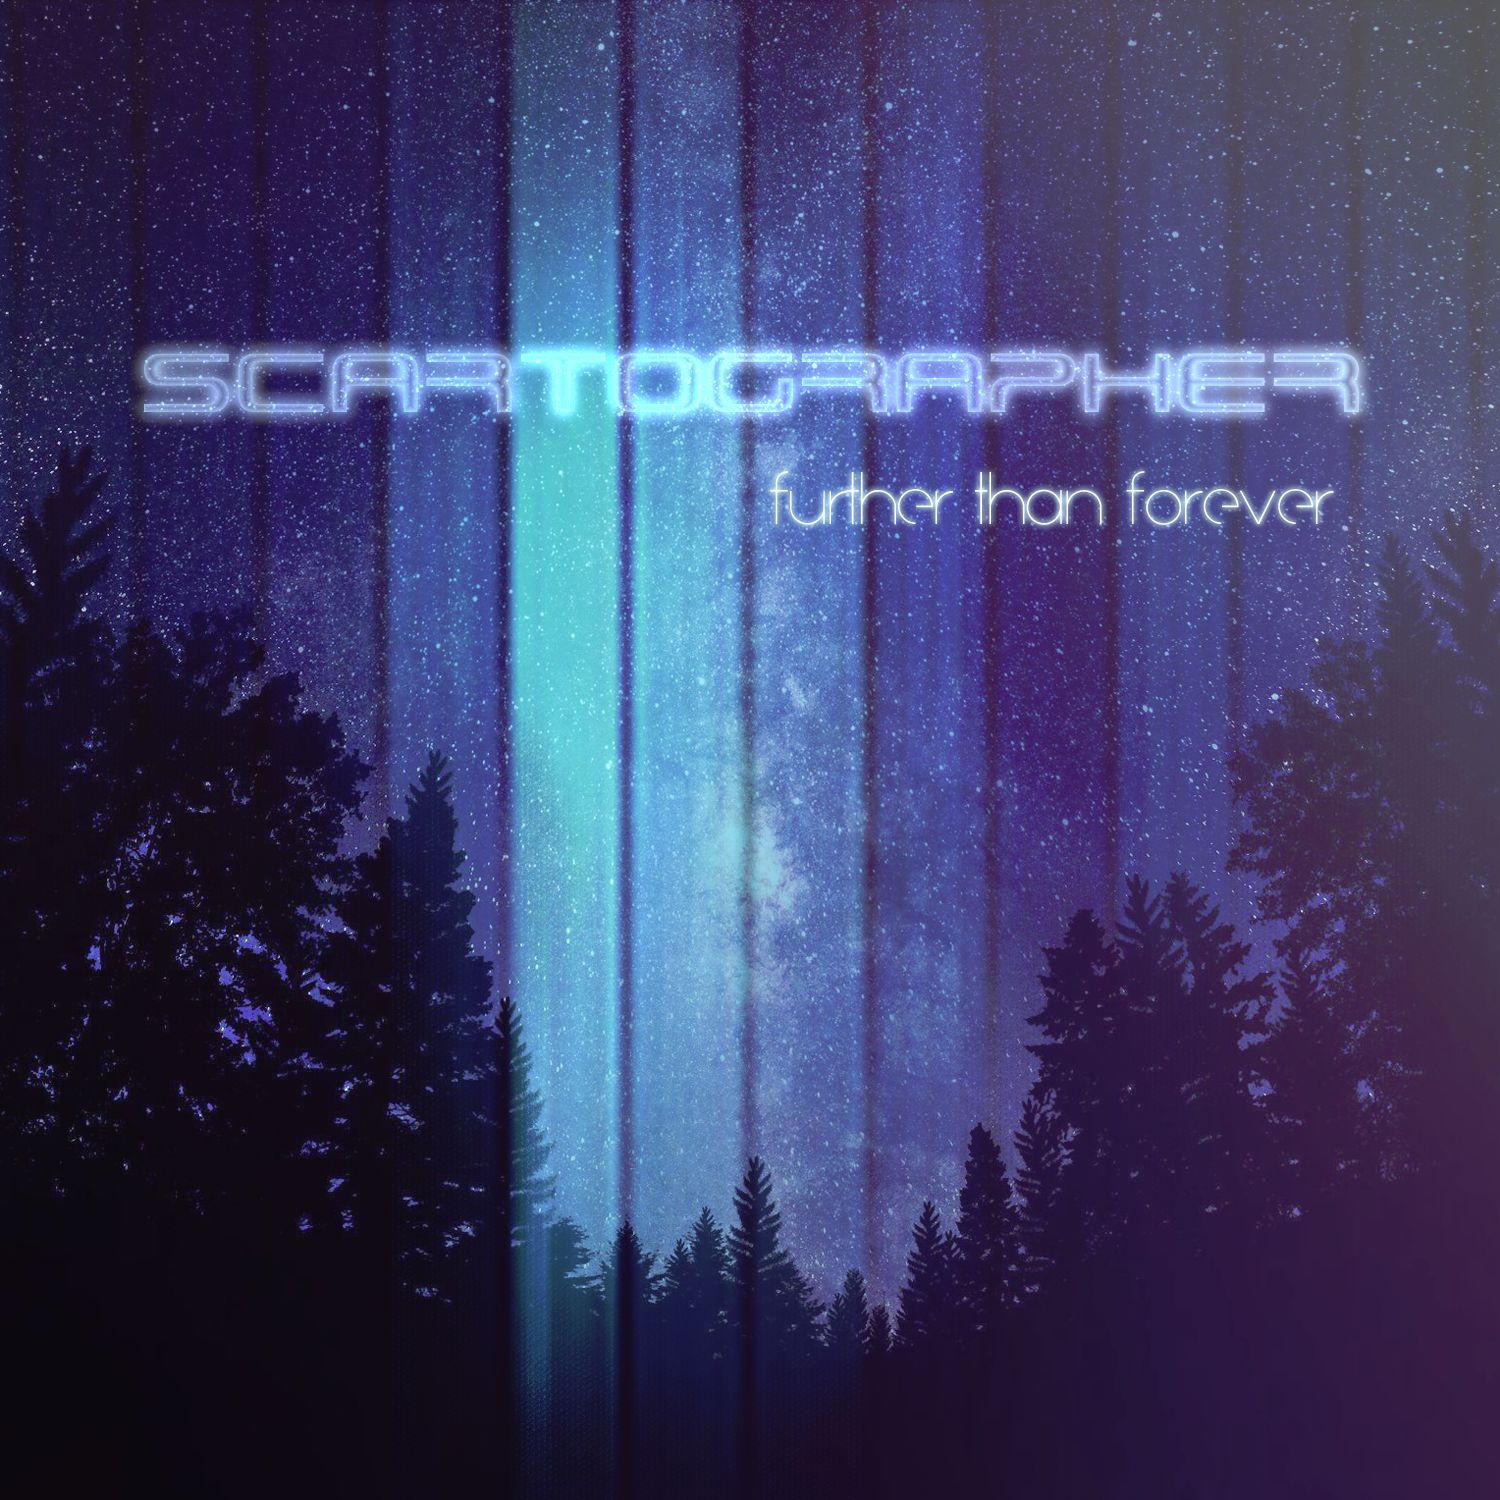 Ladda ner Scartographer - Further Than Forever